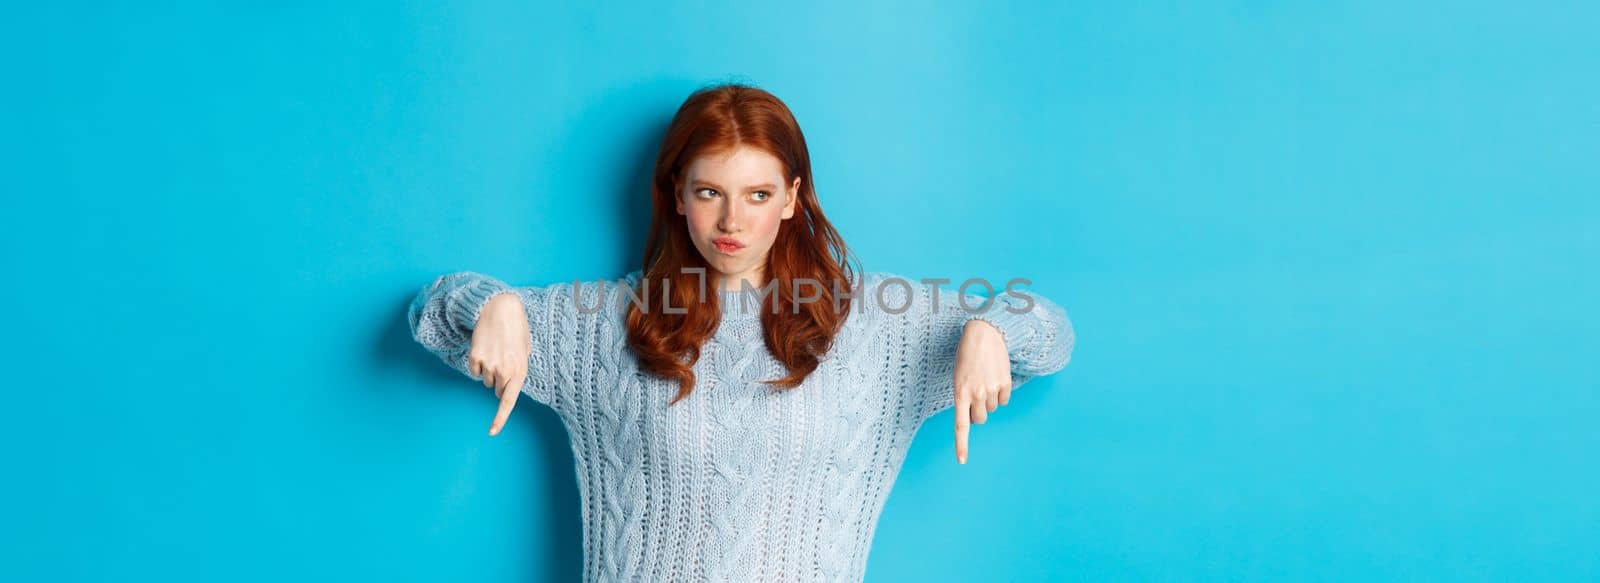 Winter holidays and people concept. Indecisive redhead girl in sweater pointing fingers down and thinking, having doubts, standing over blue background.